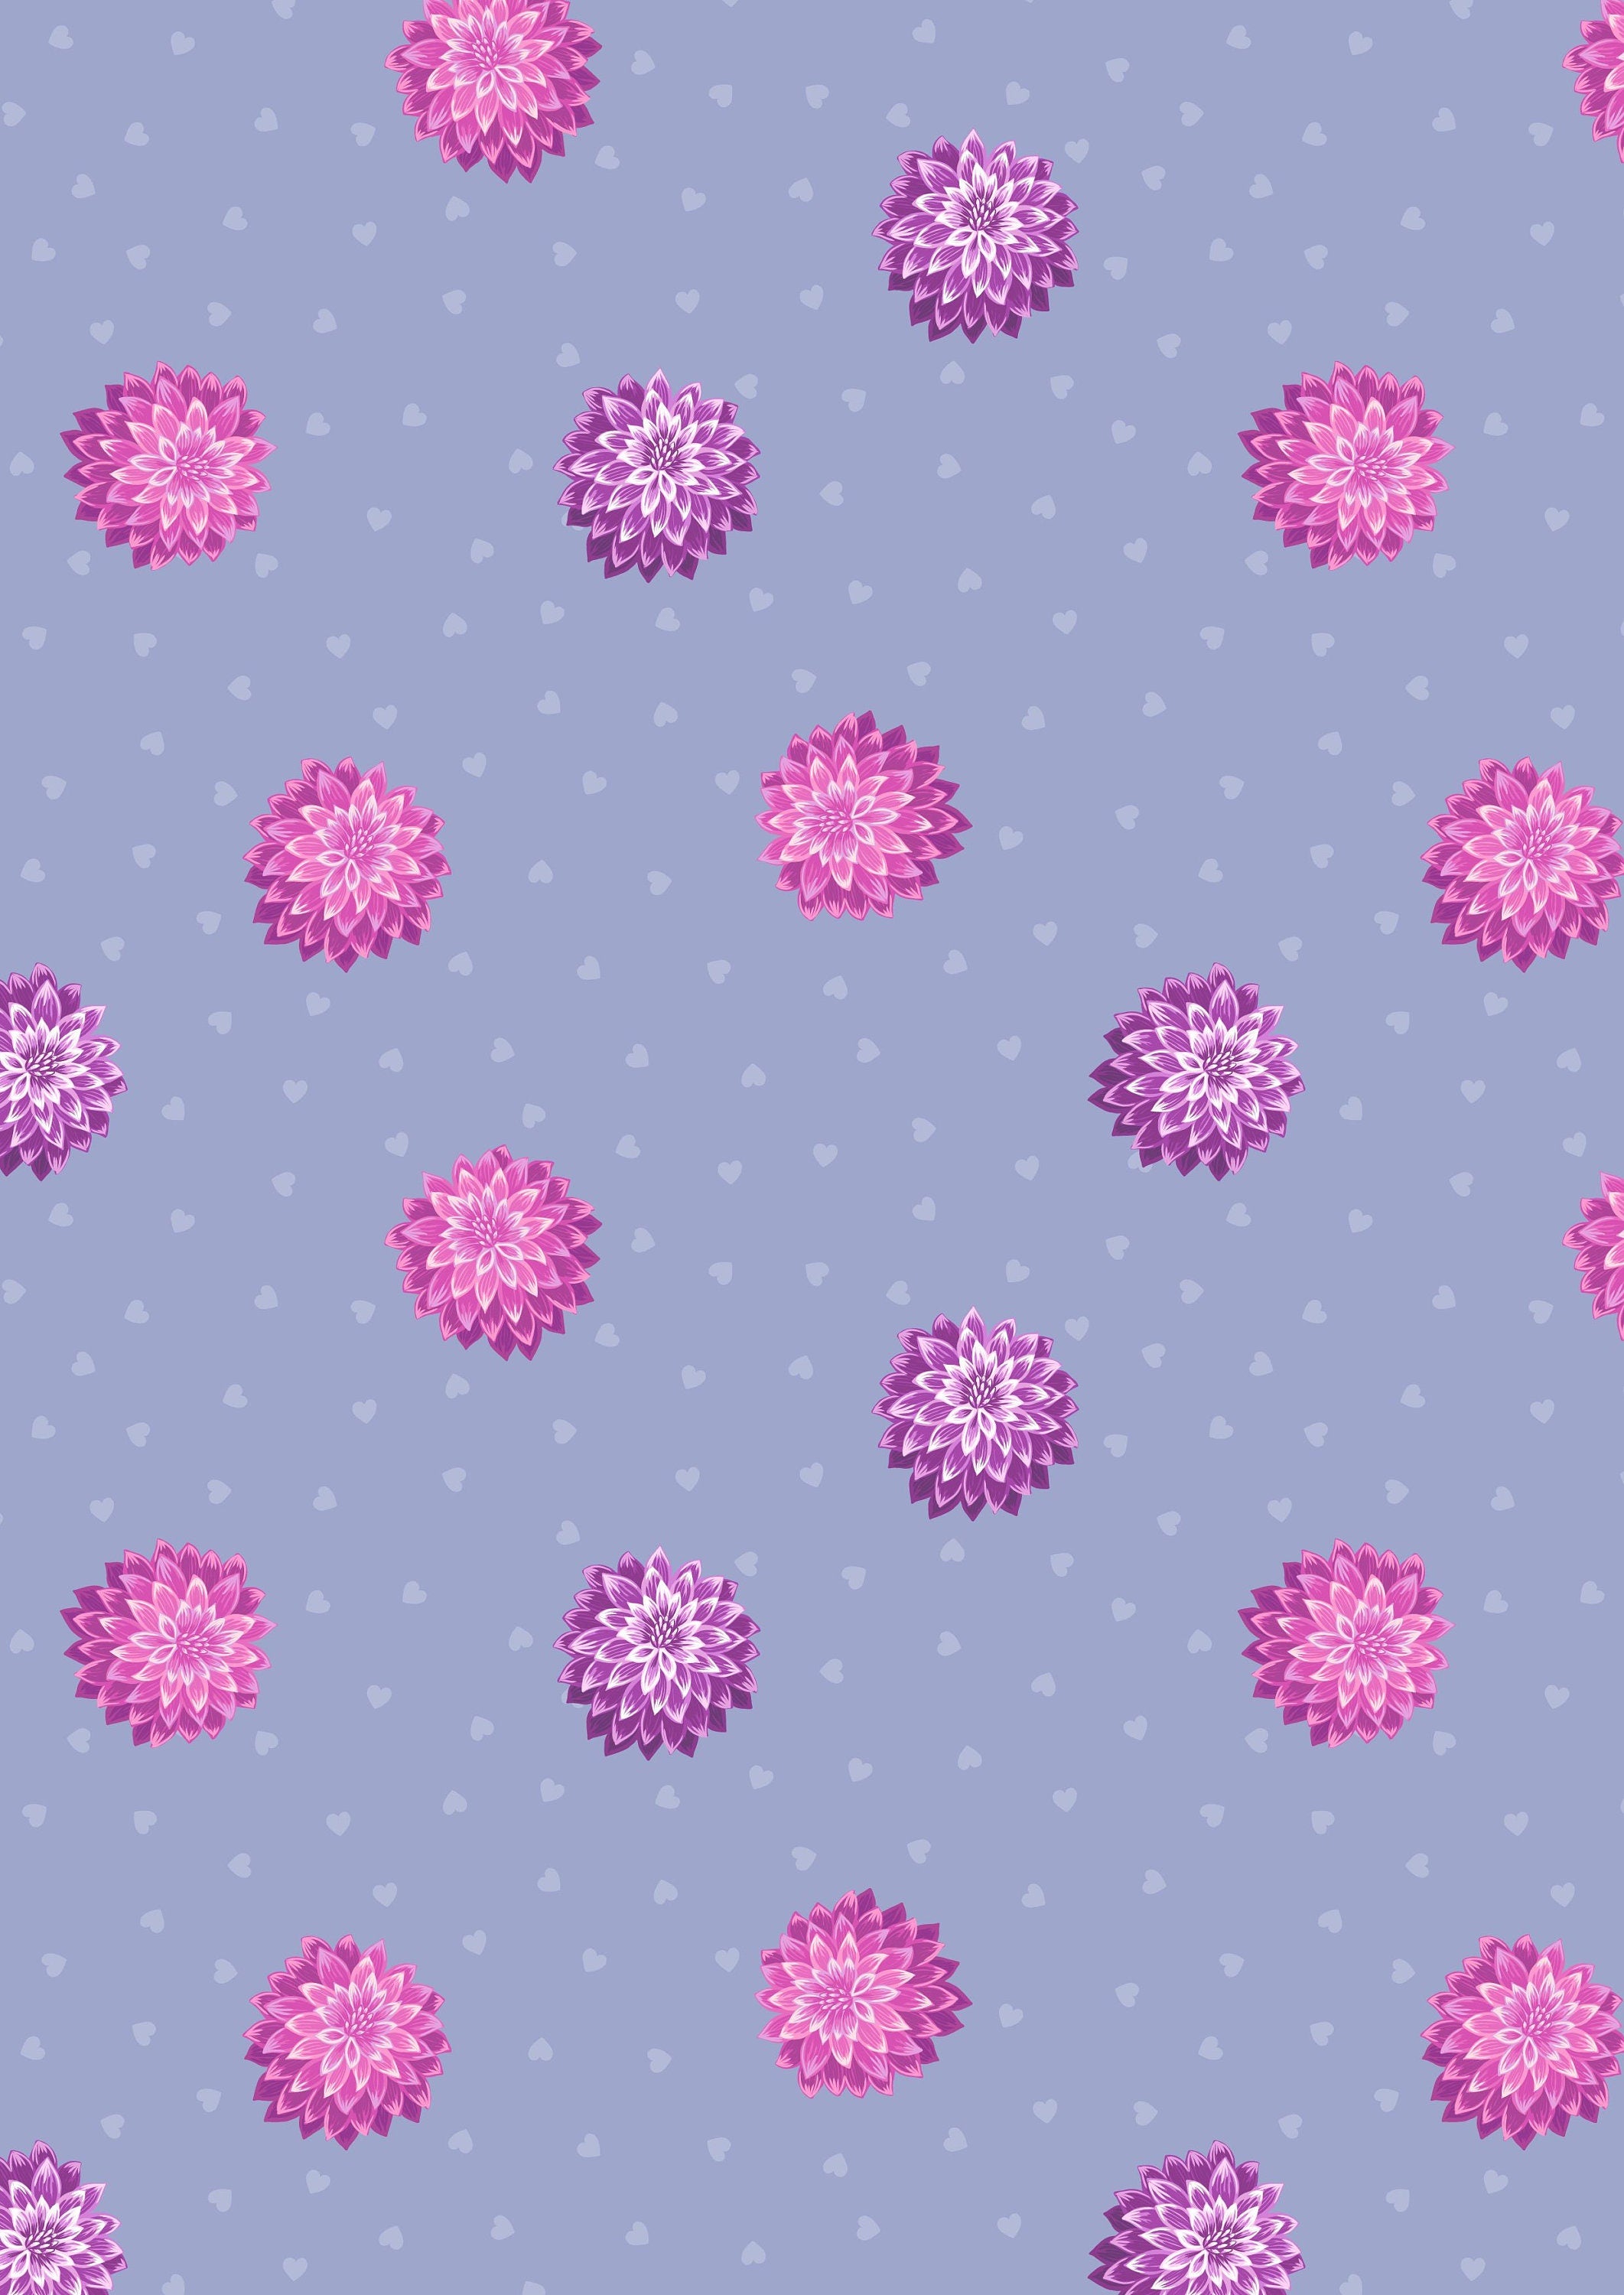 Pink and purple dahlia hearts on blue purple cotton fabric - Love Blooms by Lewis and Irene